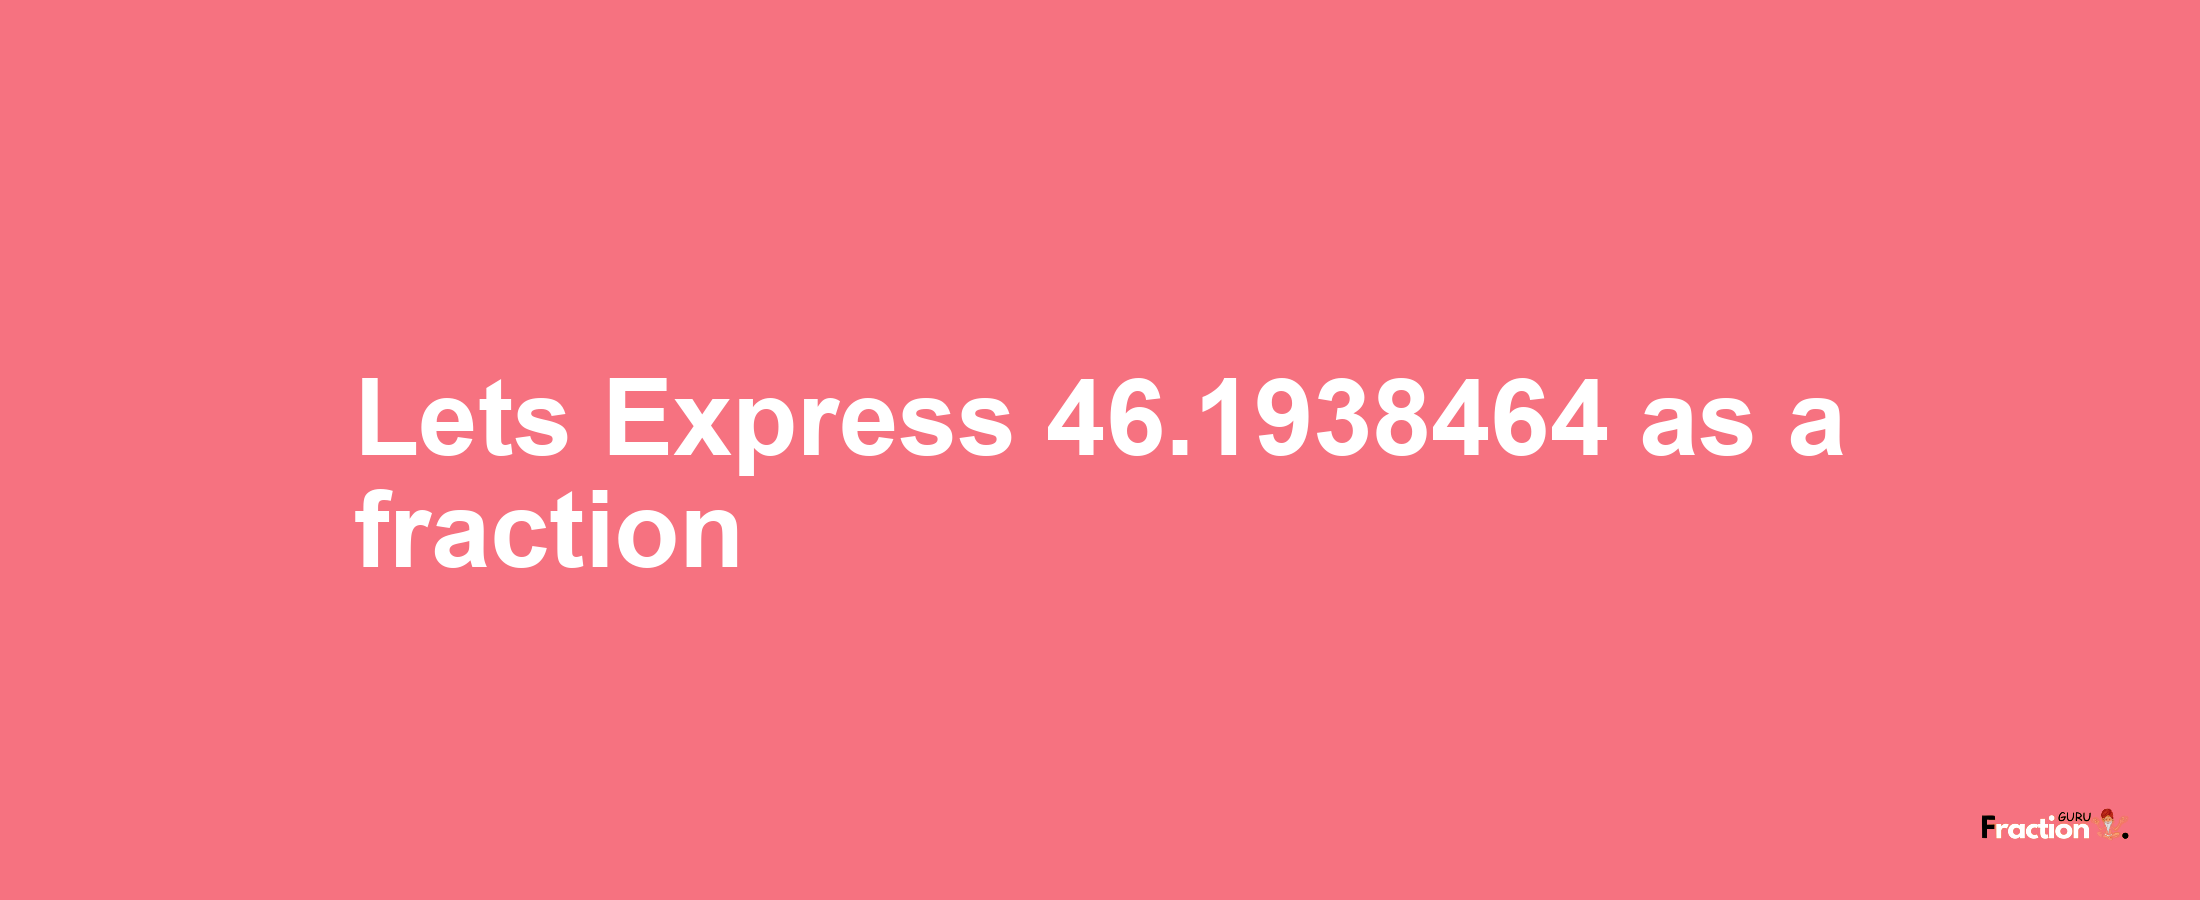 Lets Express 46.1938464 as afraction